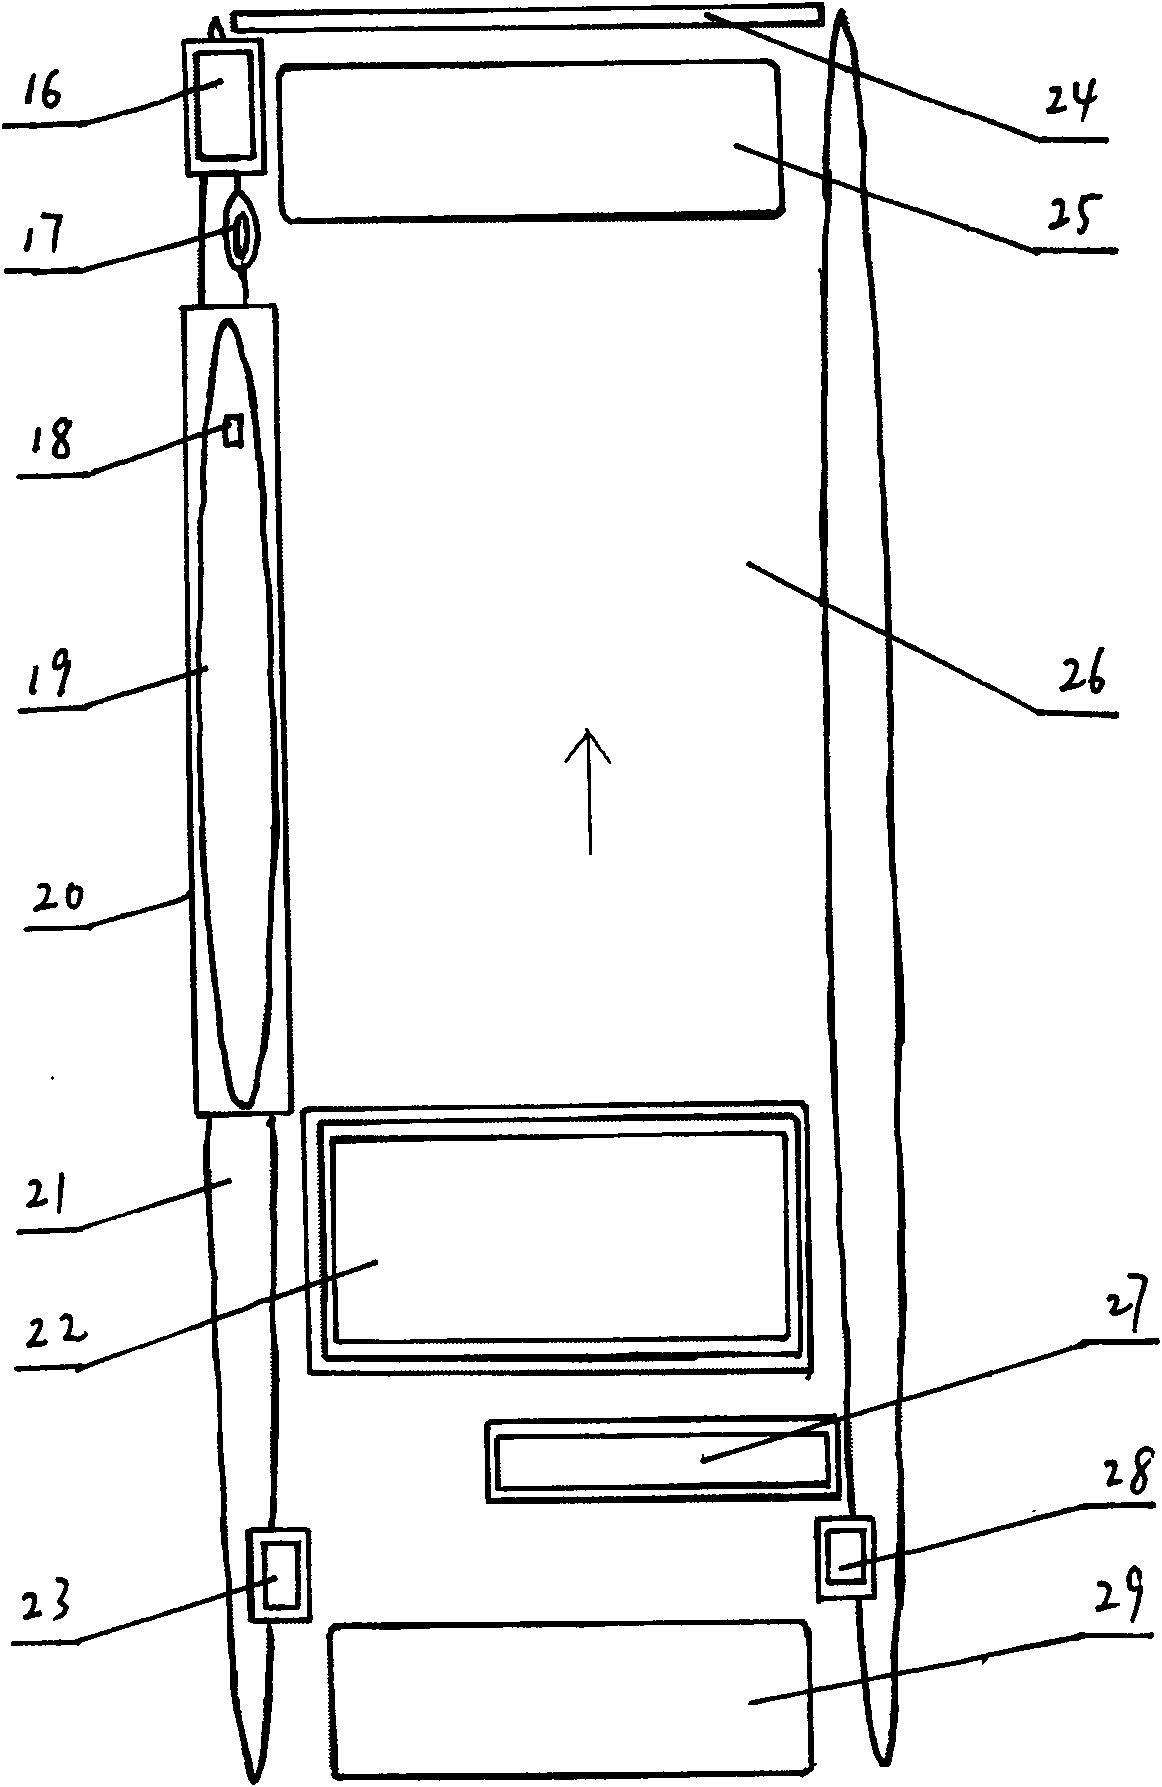 Highway toll station dynamic weighting apparatus controlling and managing system